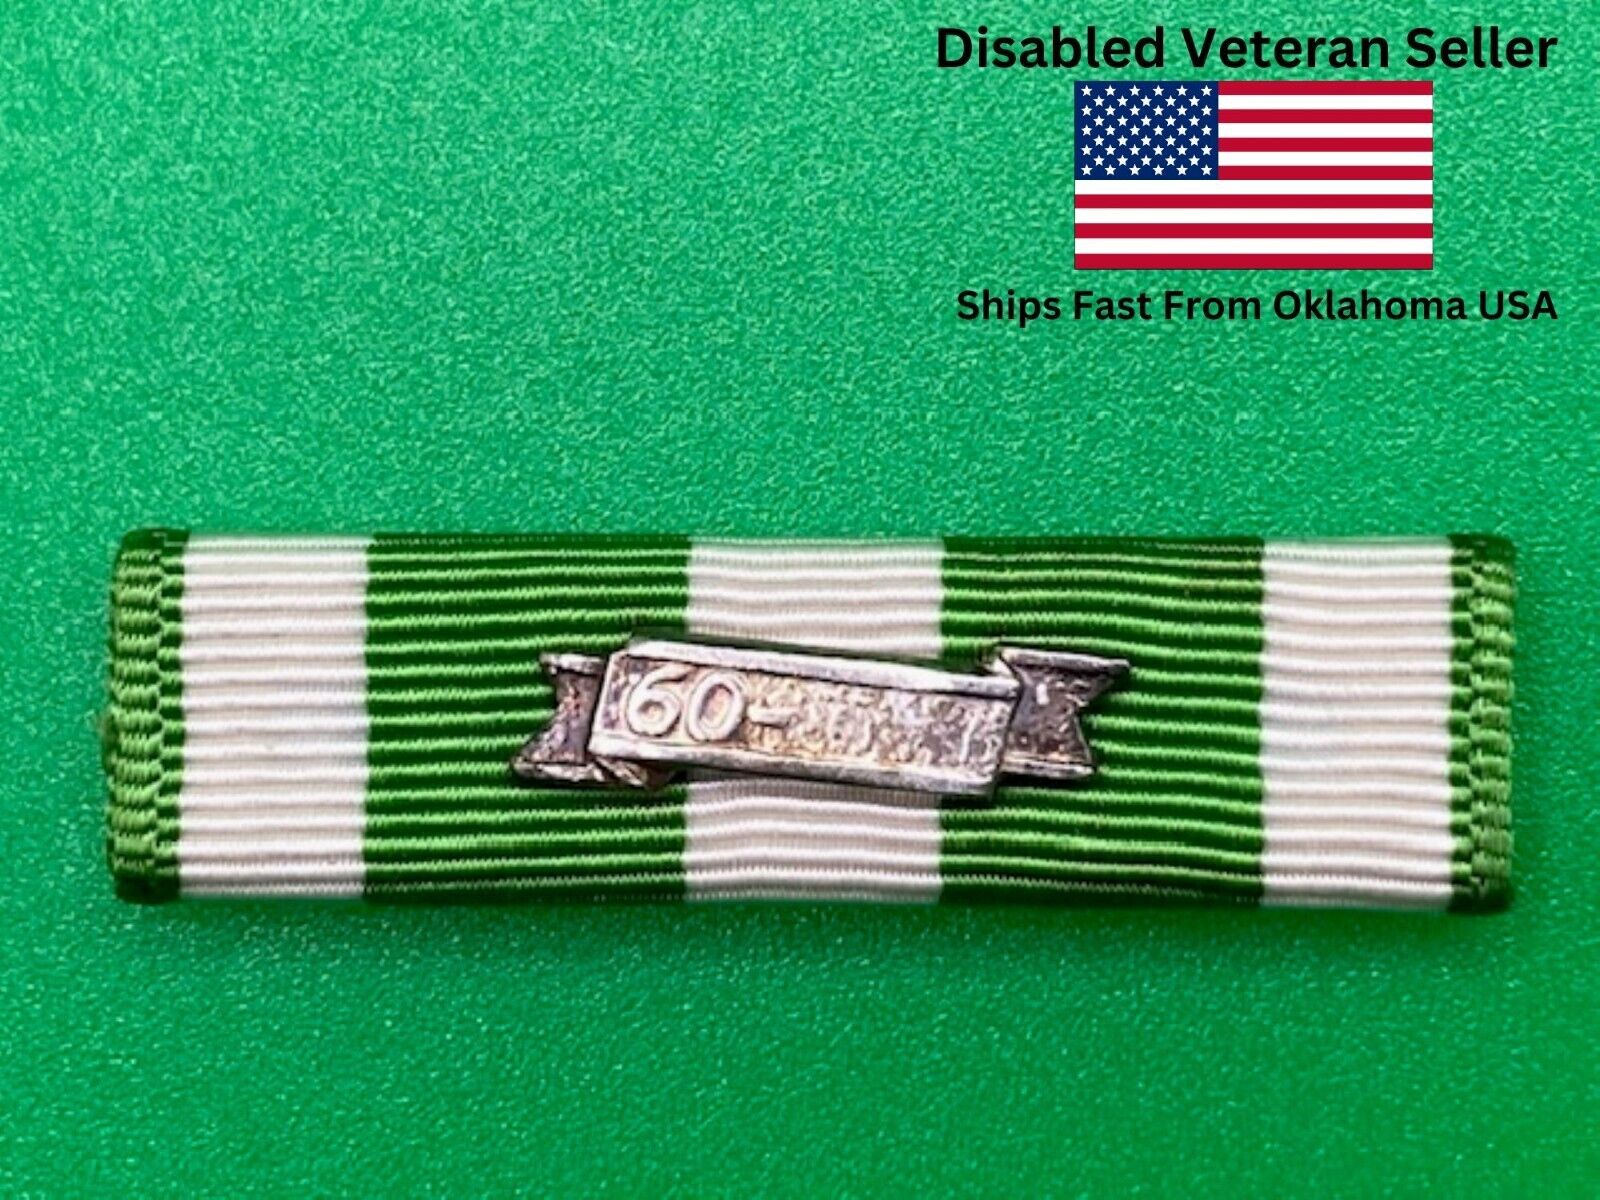 Republic of Vietnam Campaign Medal Ribbon with 60's Date Bar